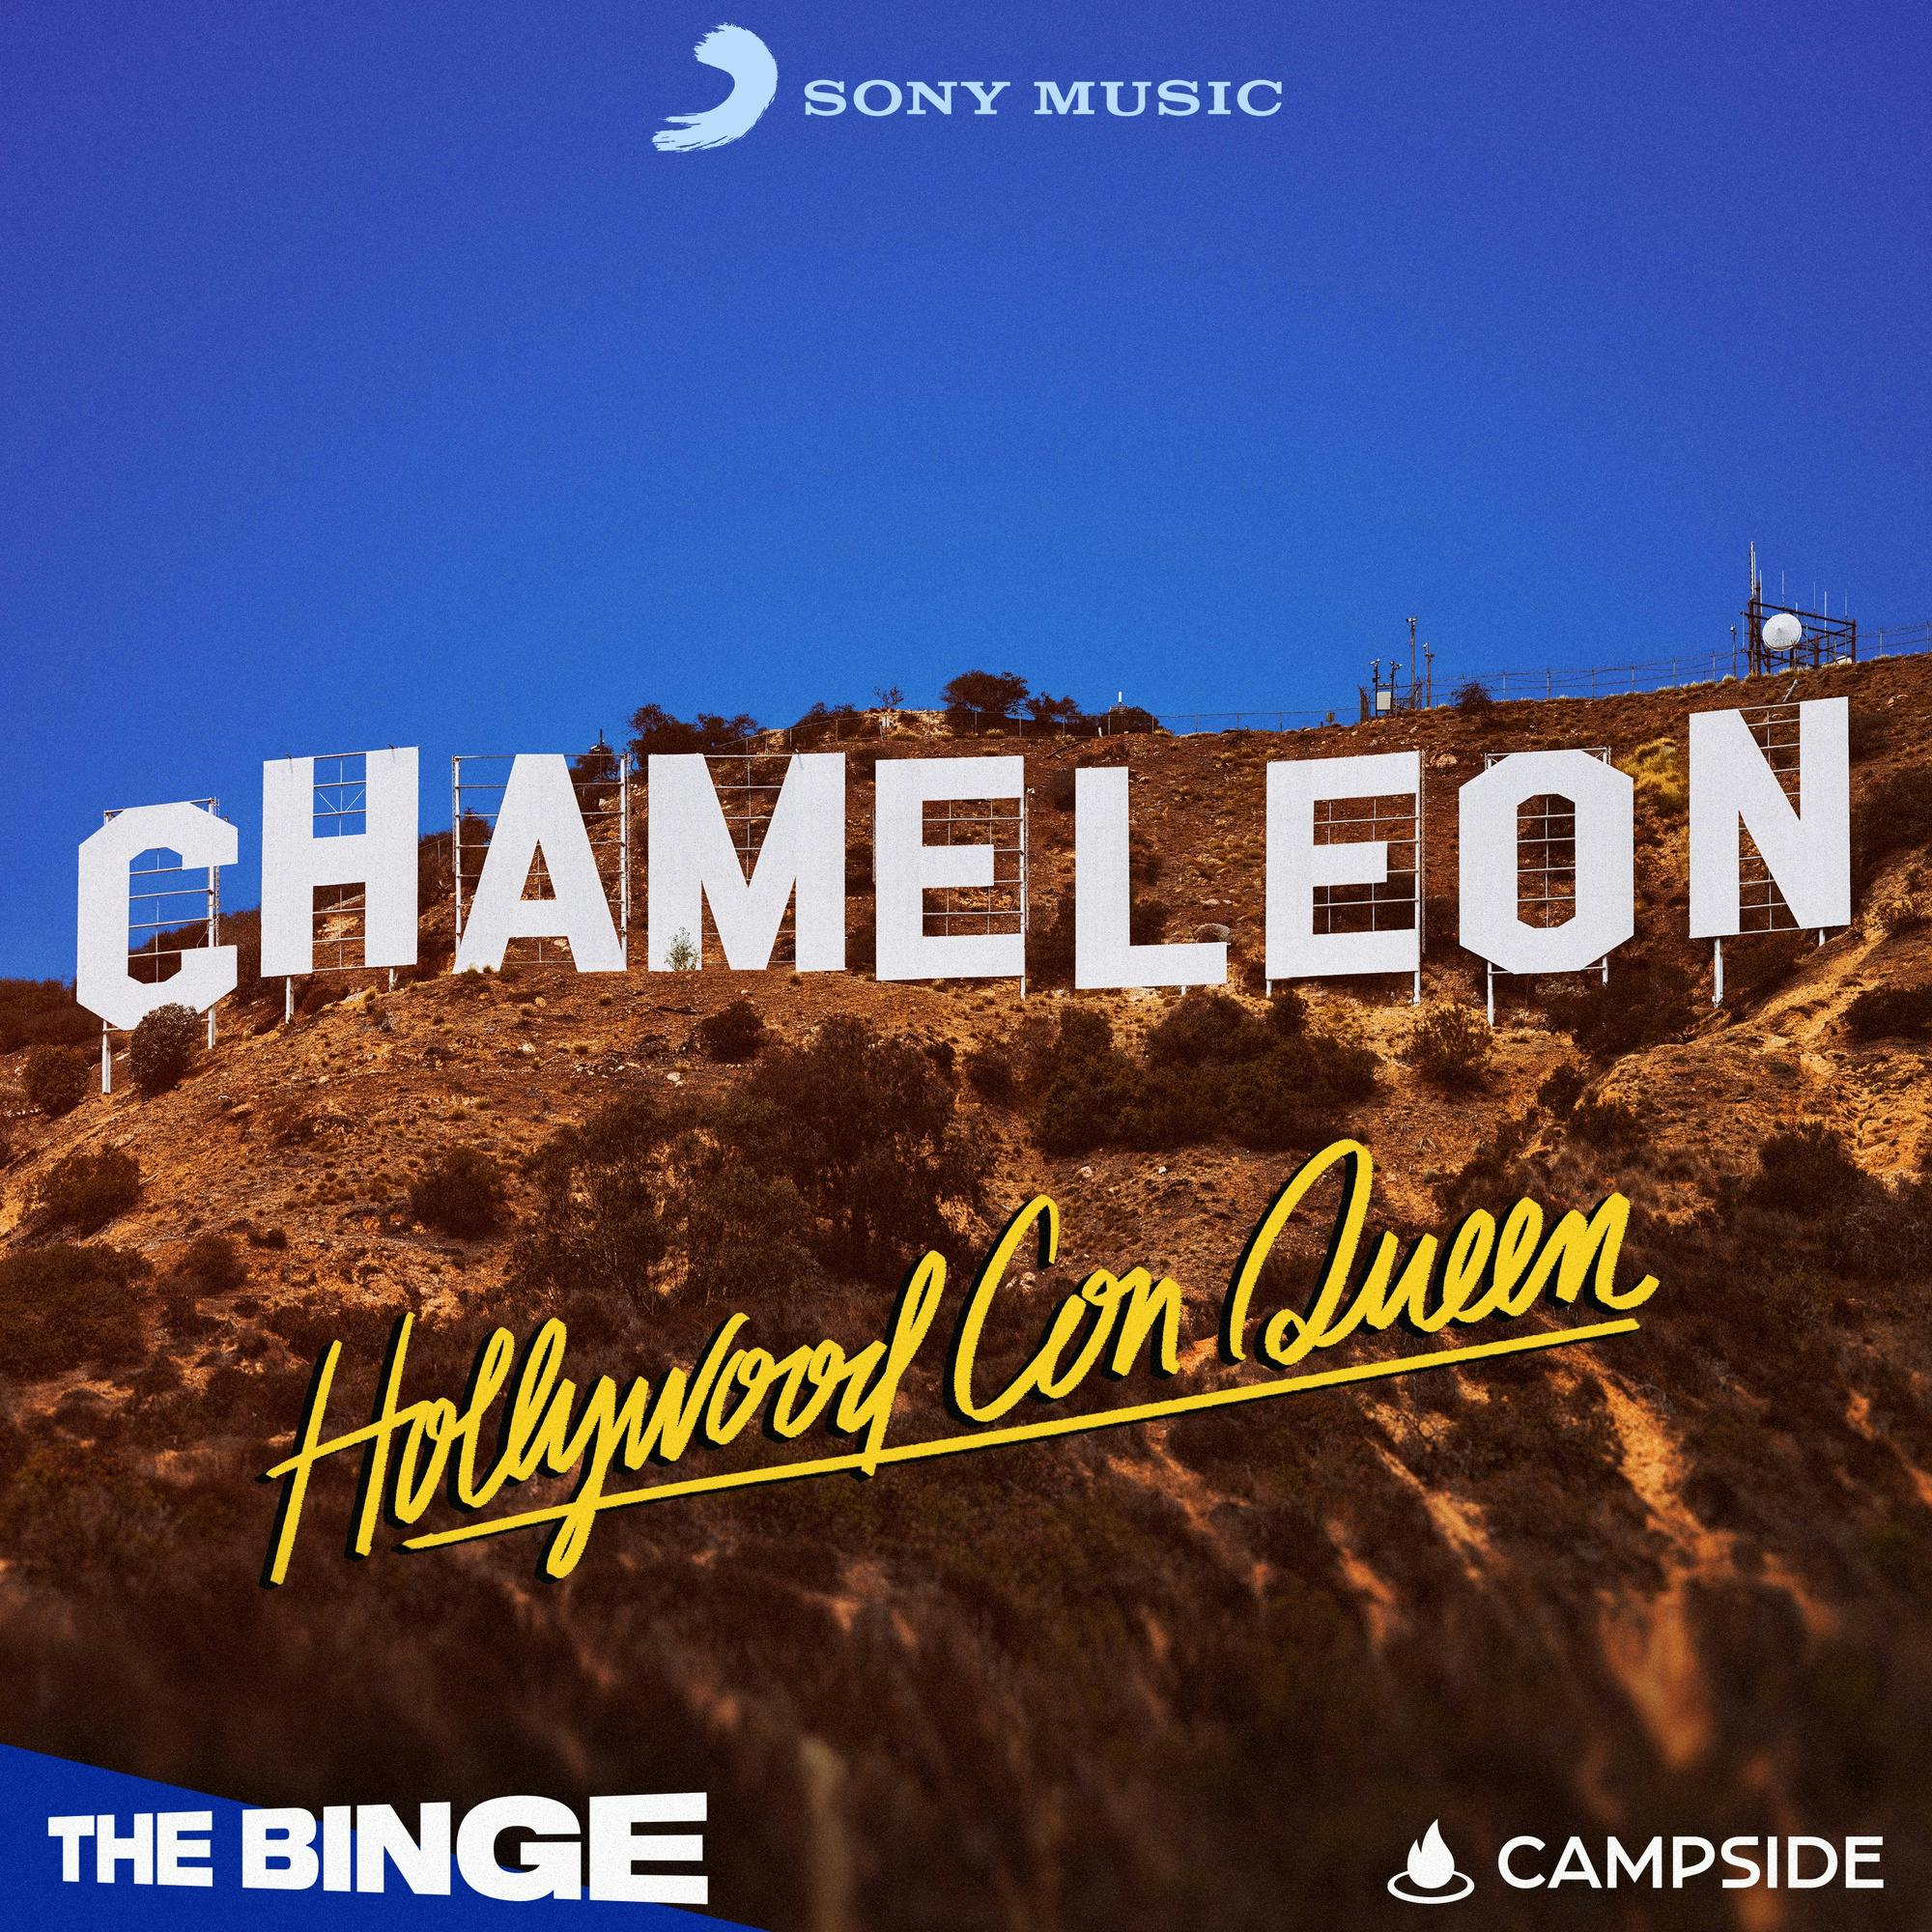 Introducing Season One of Chameleon: Hollywood Con Queen